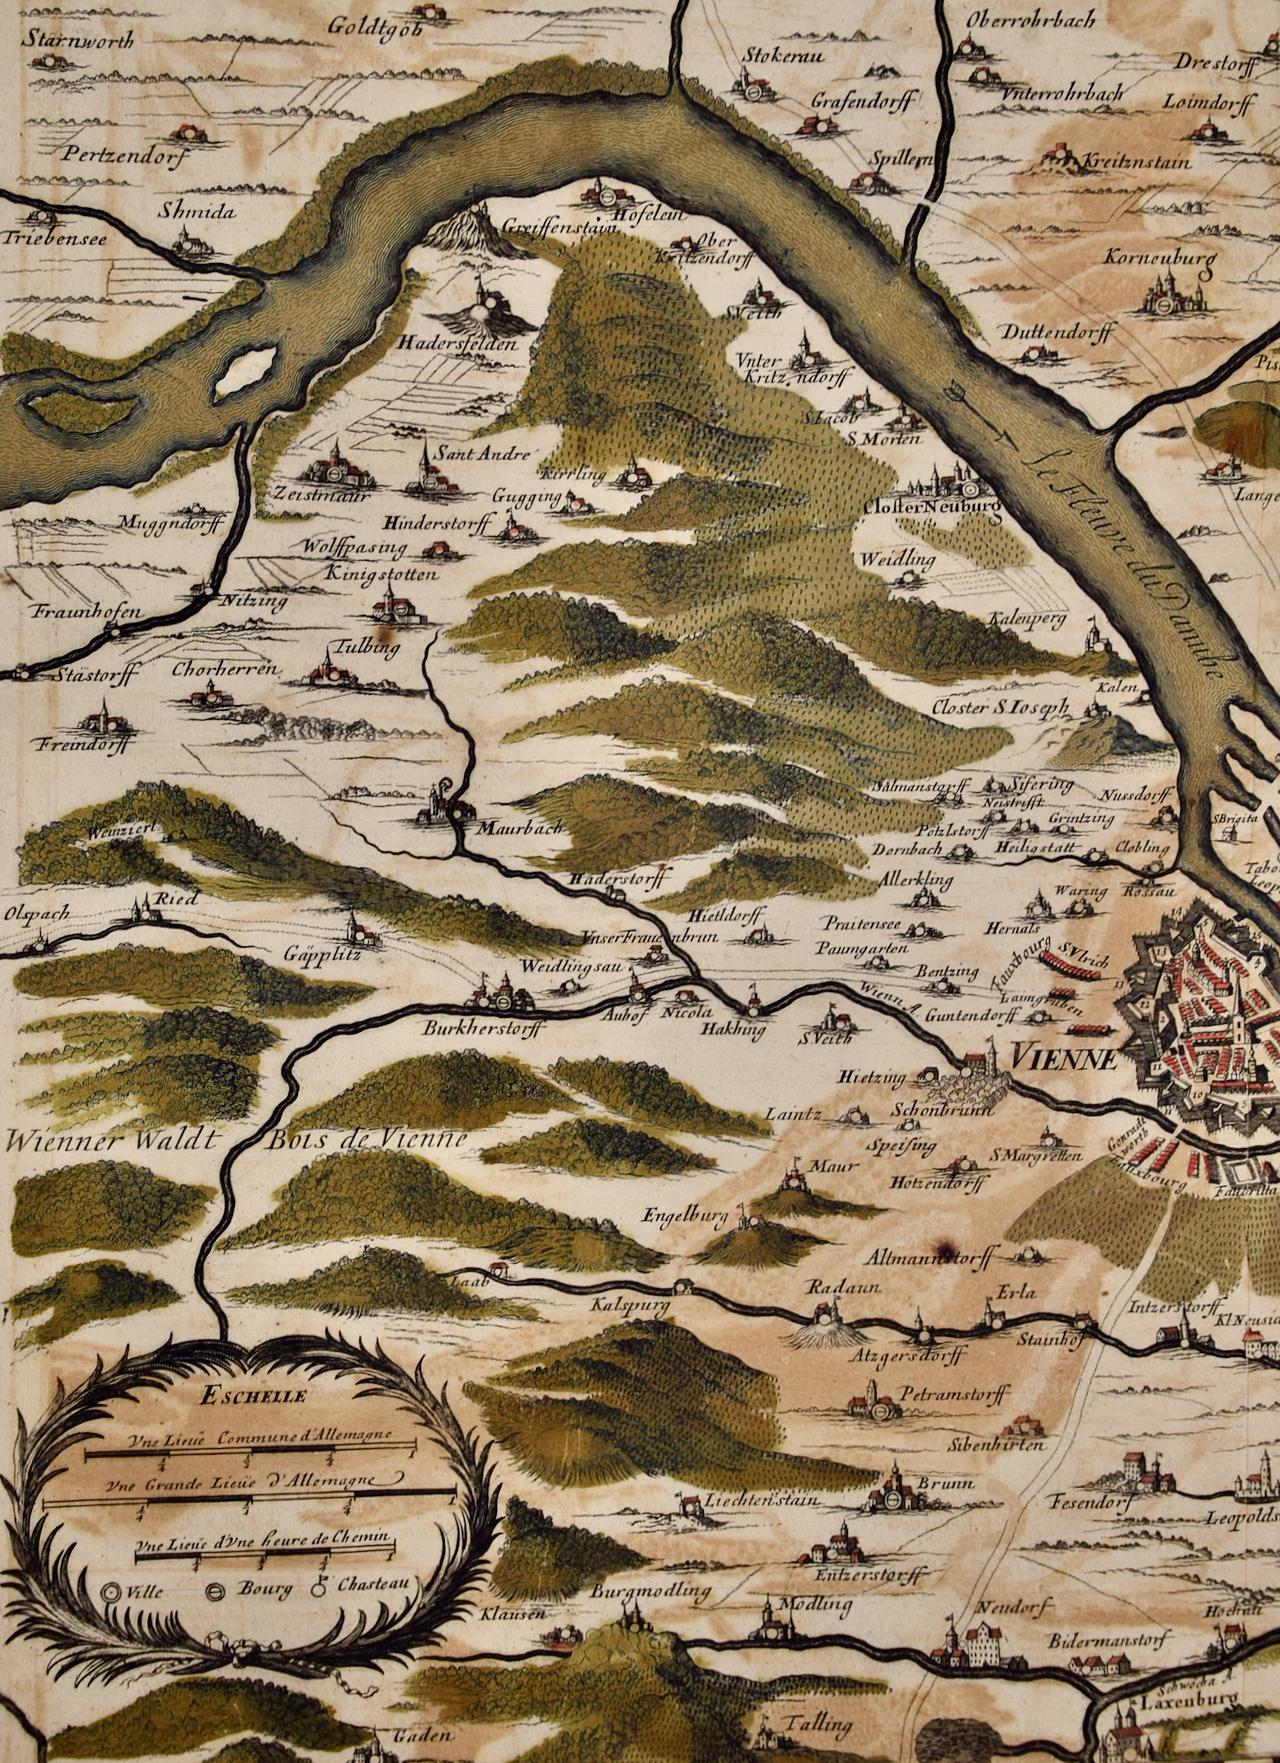 This large 17th century hand-colored map of Vienna, Austria and the surrounding countryside and villages entitled 